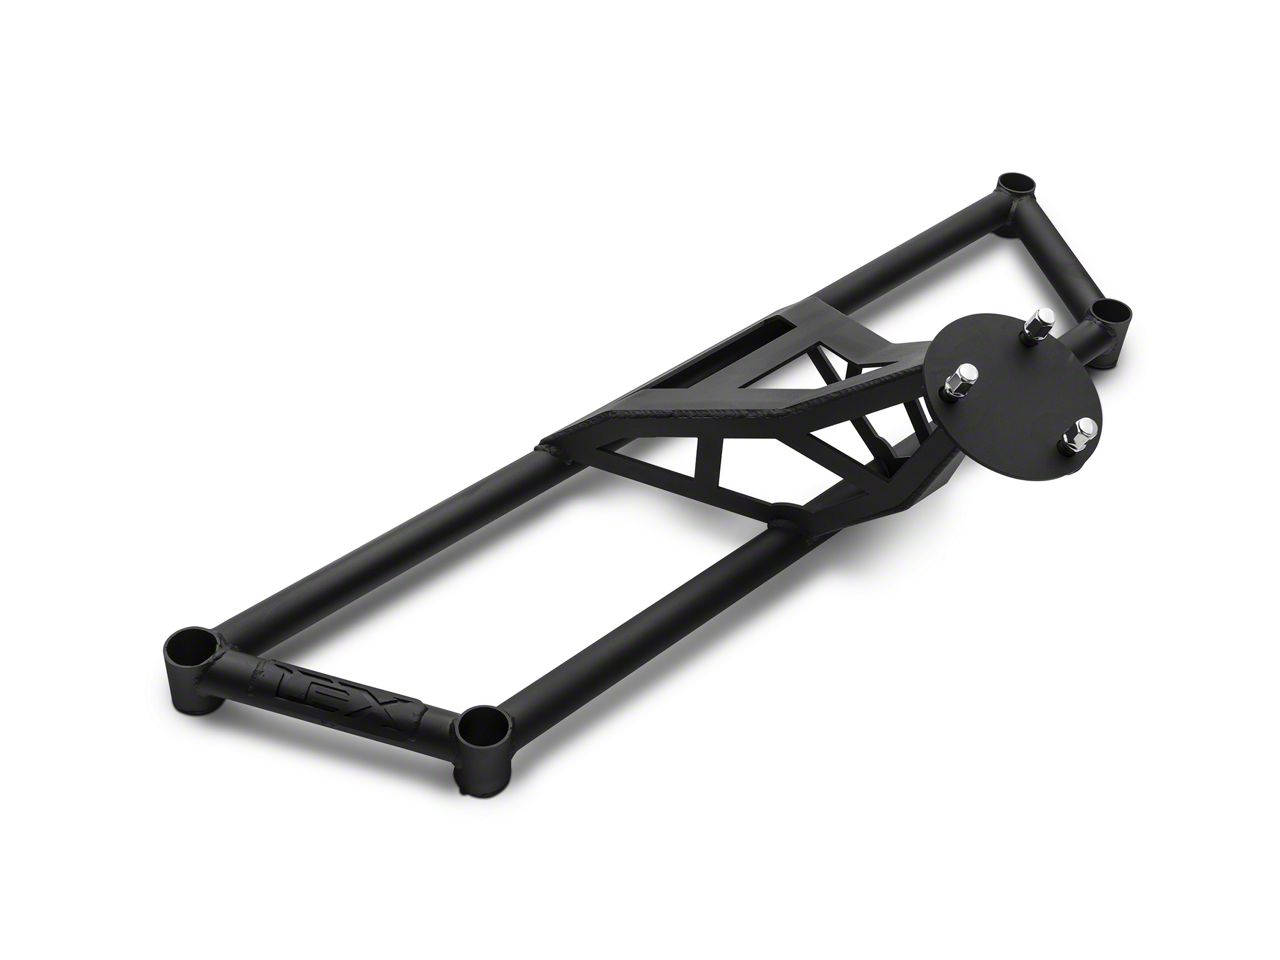 Ram 1500 Tire Carriers & Accessories